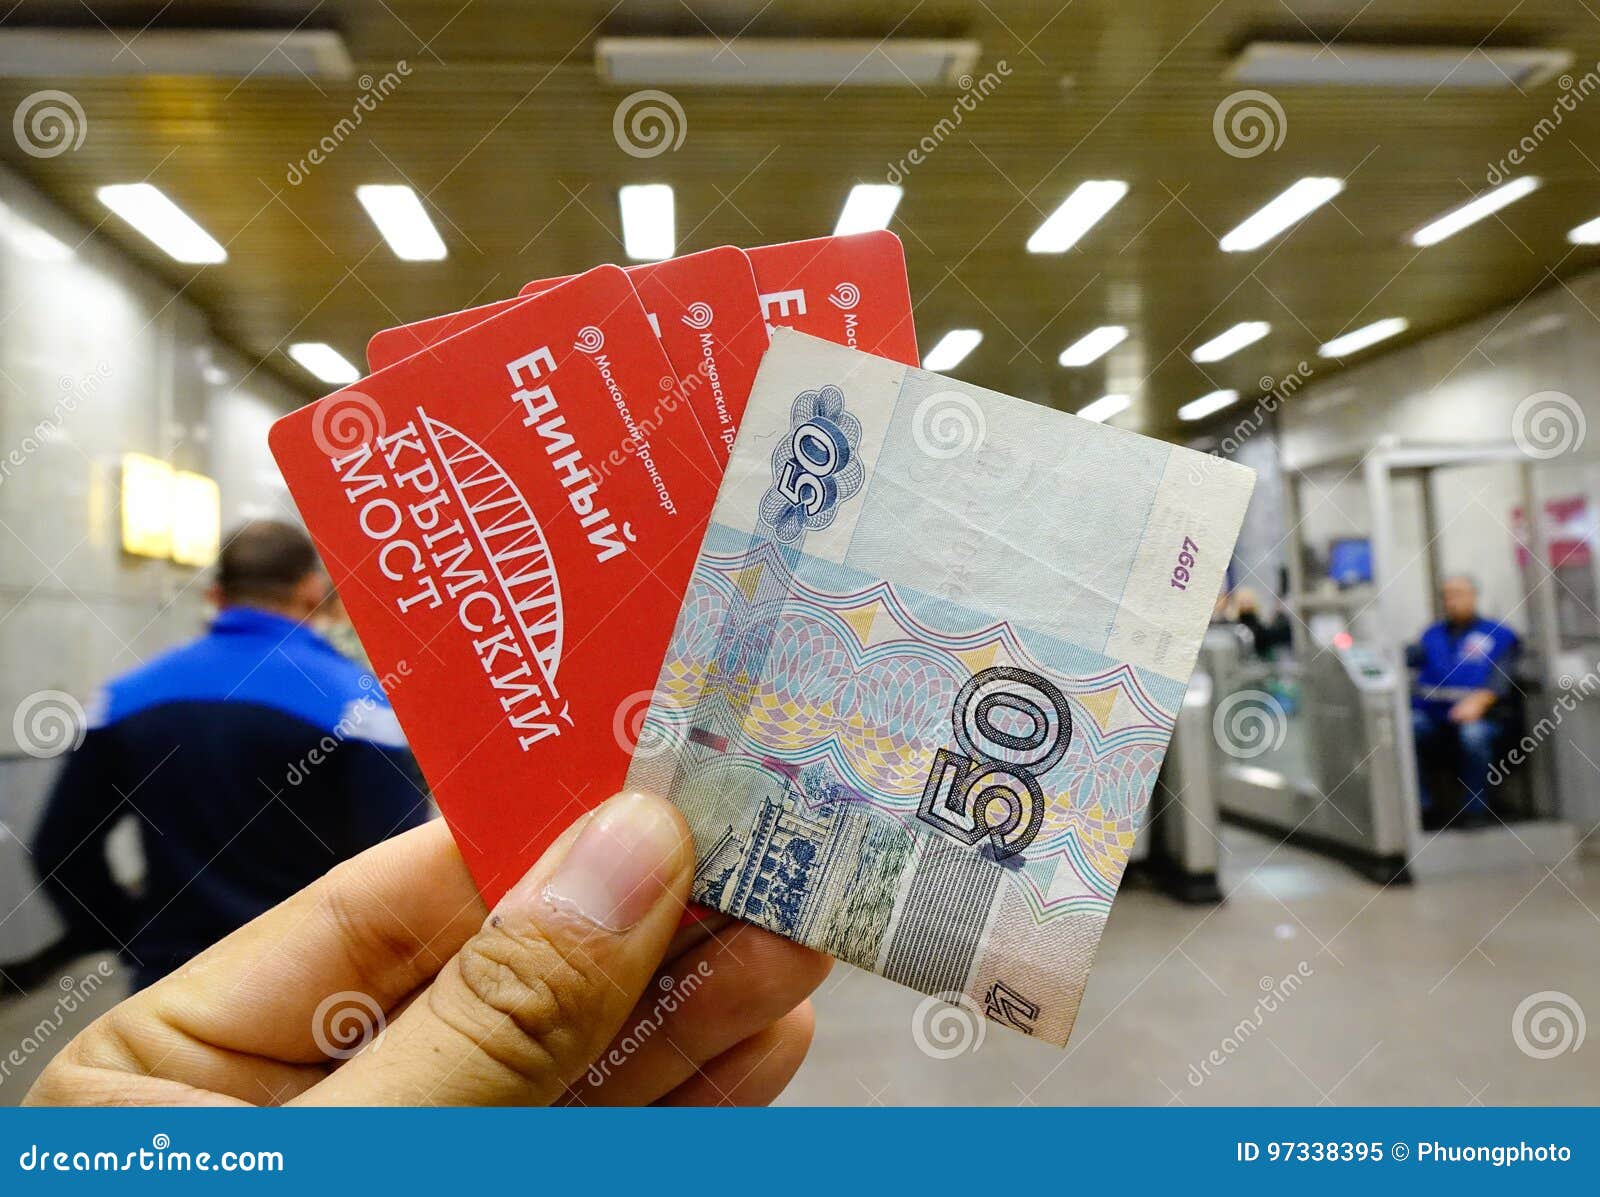 Train Tickets and tickets to shows in Russia